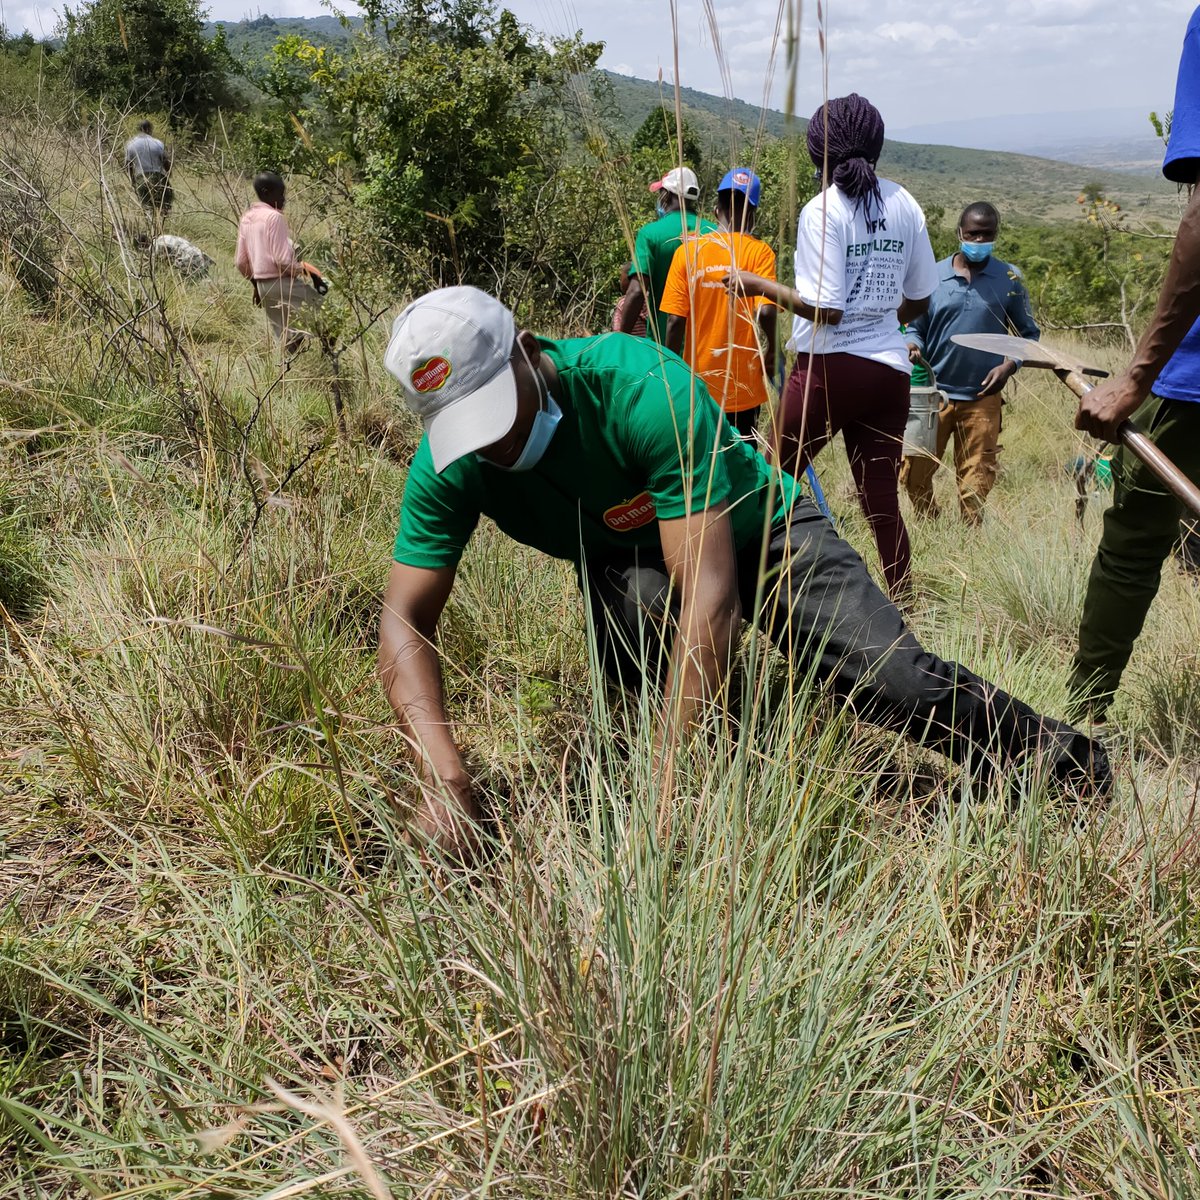 In today's exercise @DelmonteKenya partnered with @kwskenya to plant 10,000 trees at Ol' Donyo Sabuk National Park. @kdfinfo, @MullyFamily and  @kelchemicals took part in the exercise #DelMonteTreePlanting